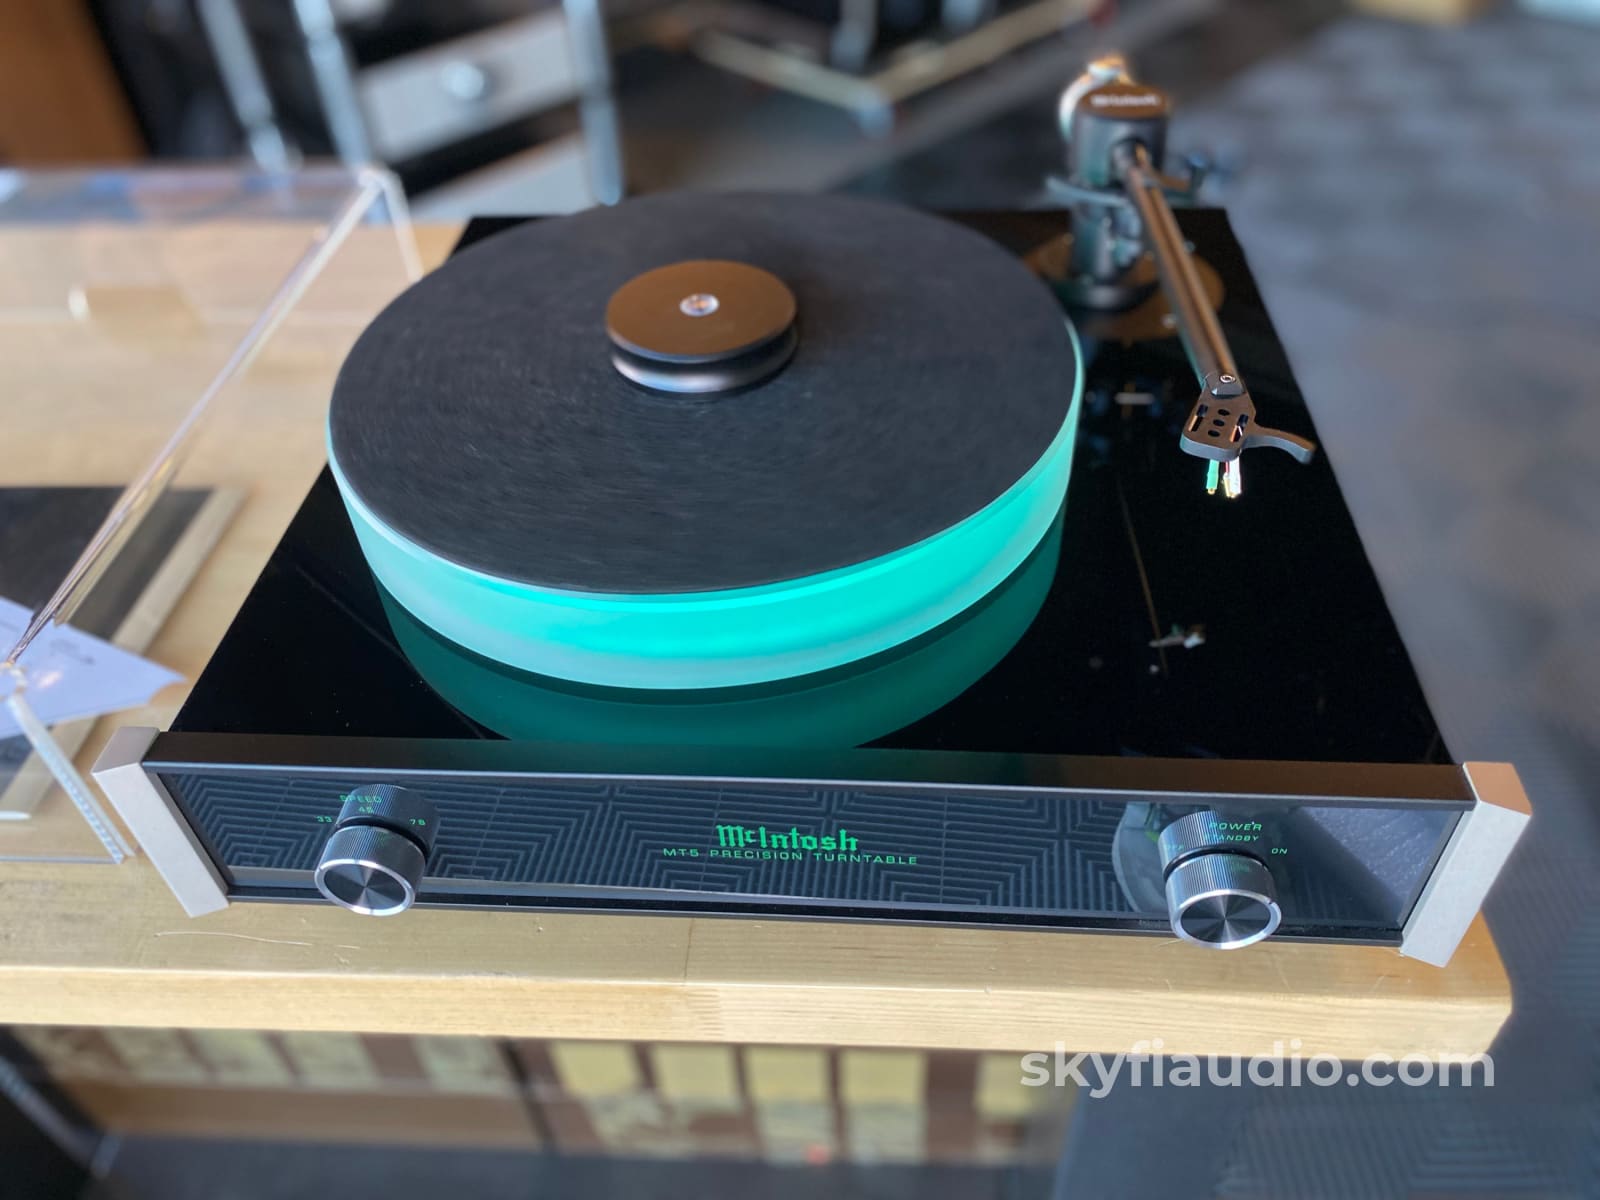 Mcintosh Mt5 Precision Turntable - In Store Only